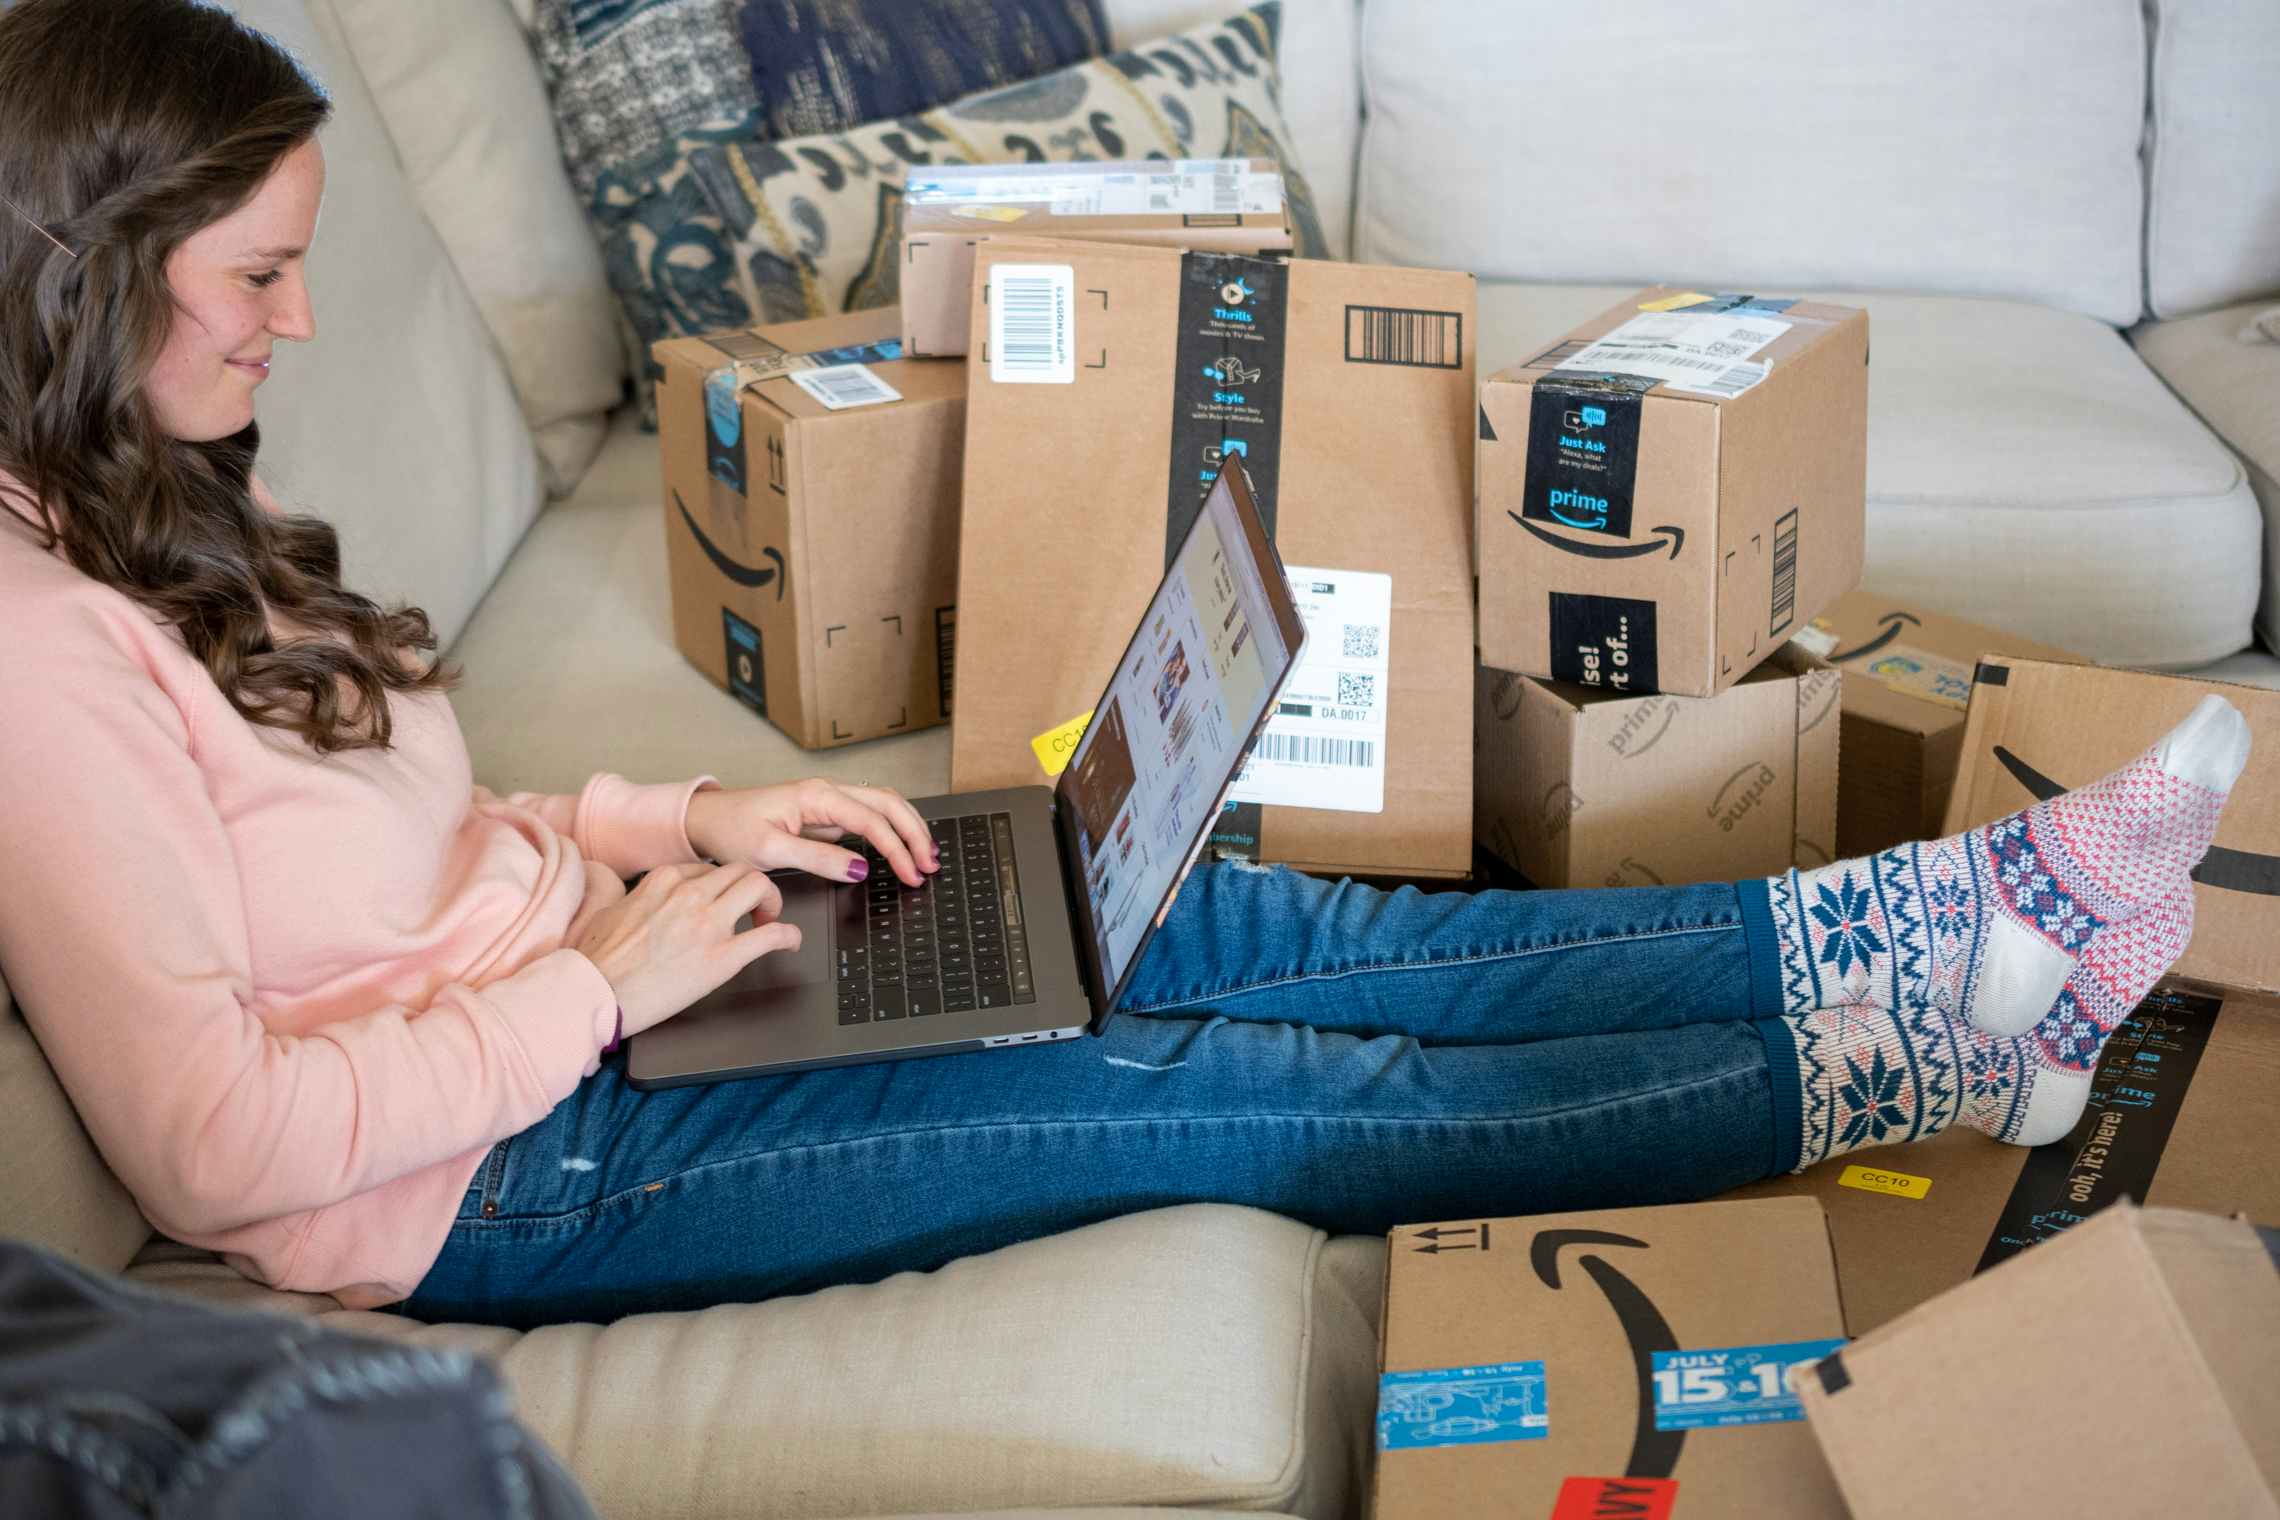 A woman sitting on a couch with a laptop computer on her lap, surrounded by Amazon delivery boxes.